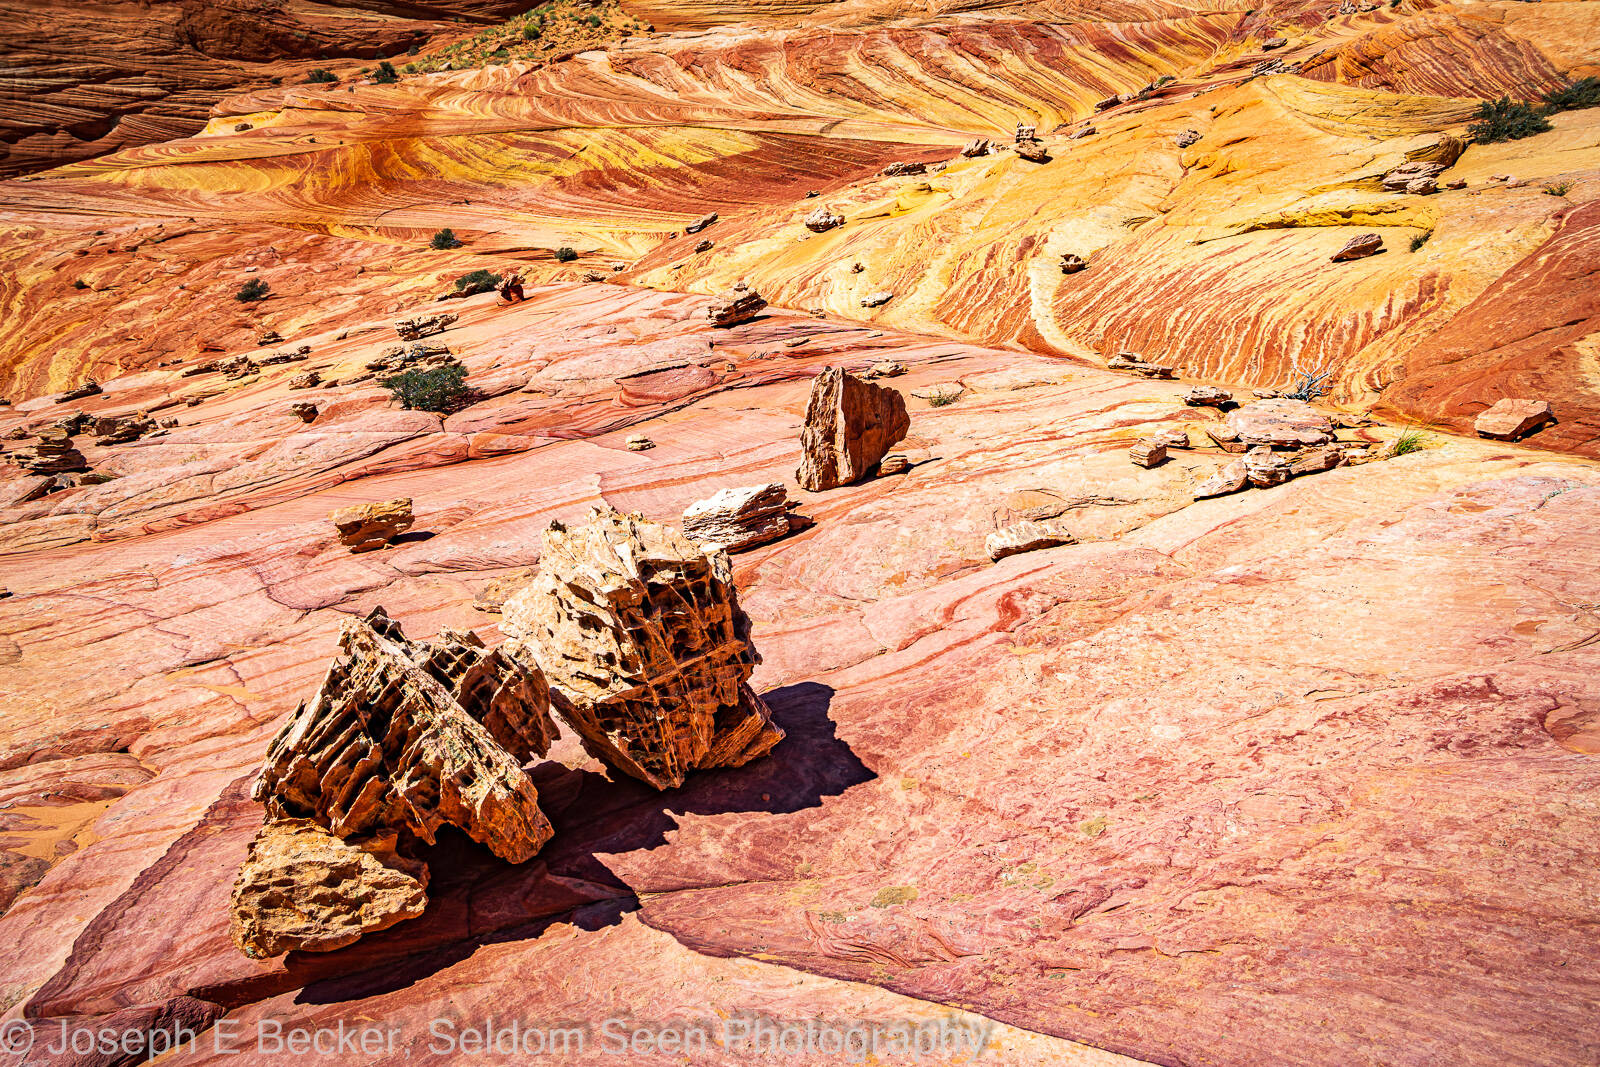 Image of Coyote Buttes North - The Boneyard by Joe Becker